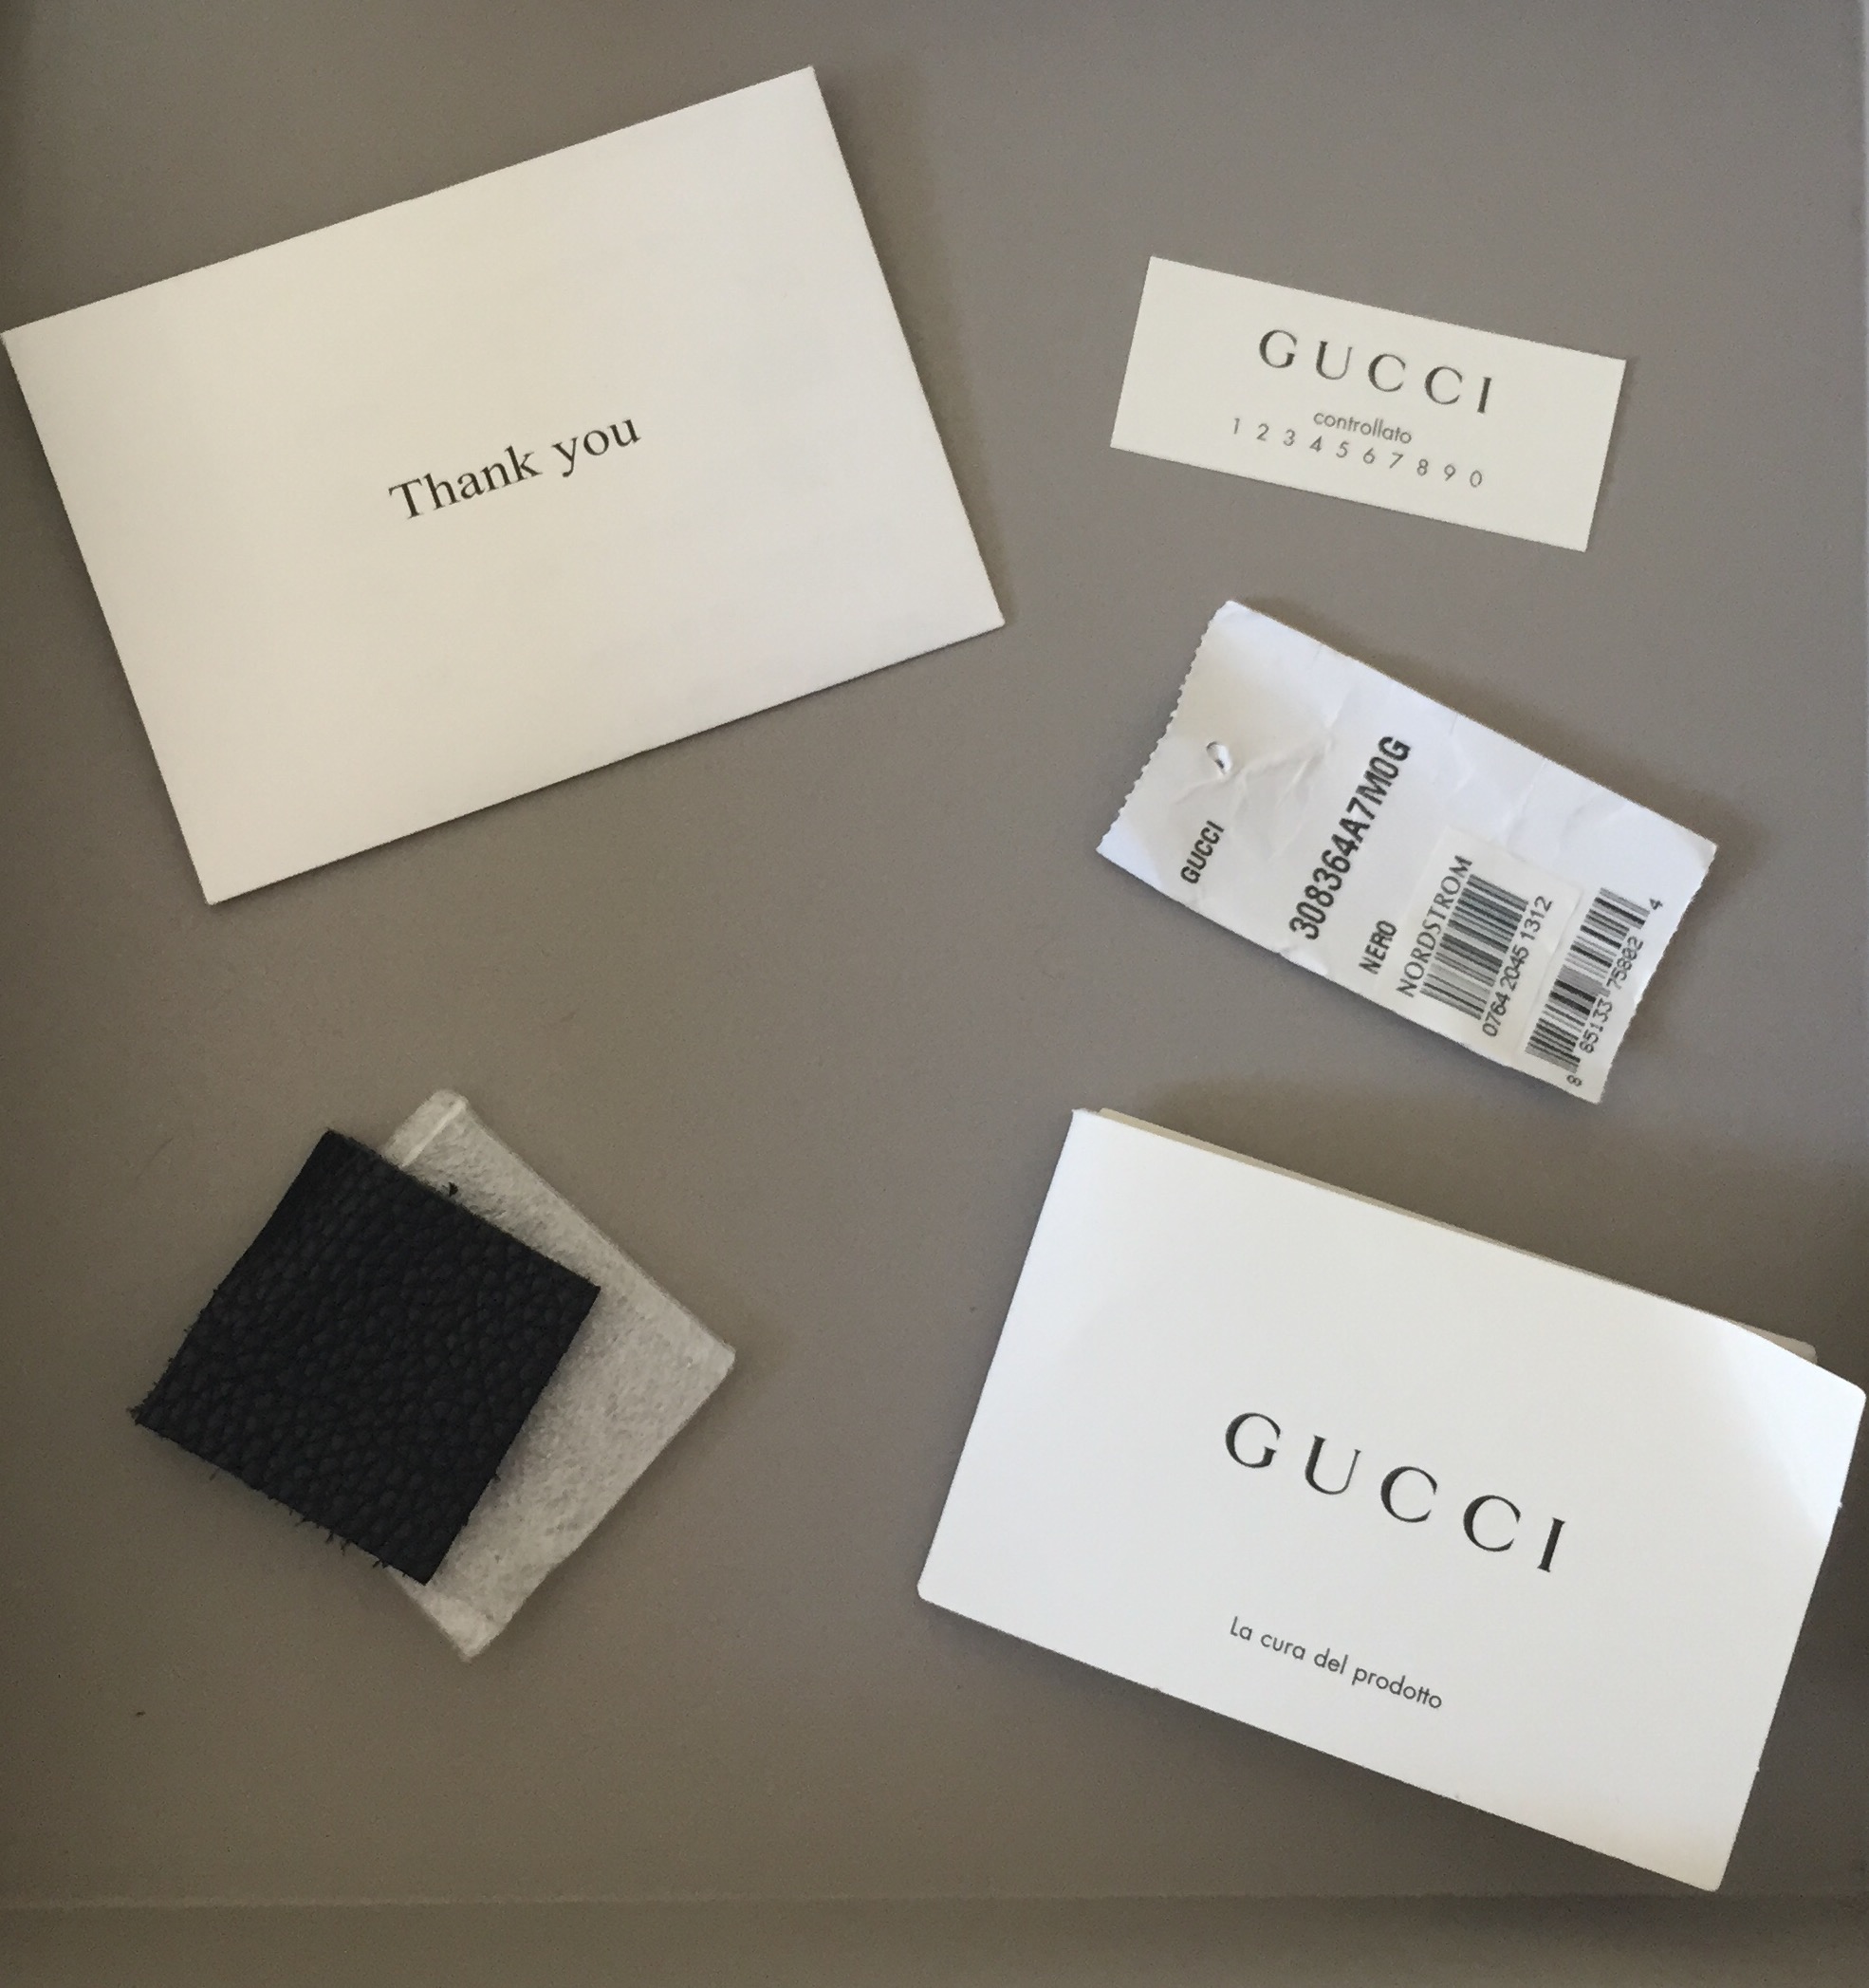 gucci bag authenticity card